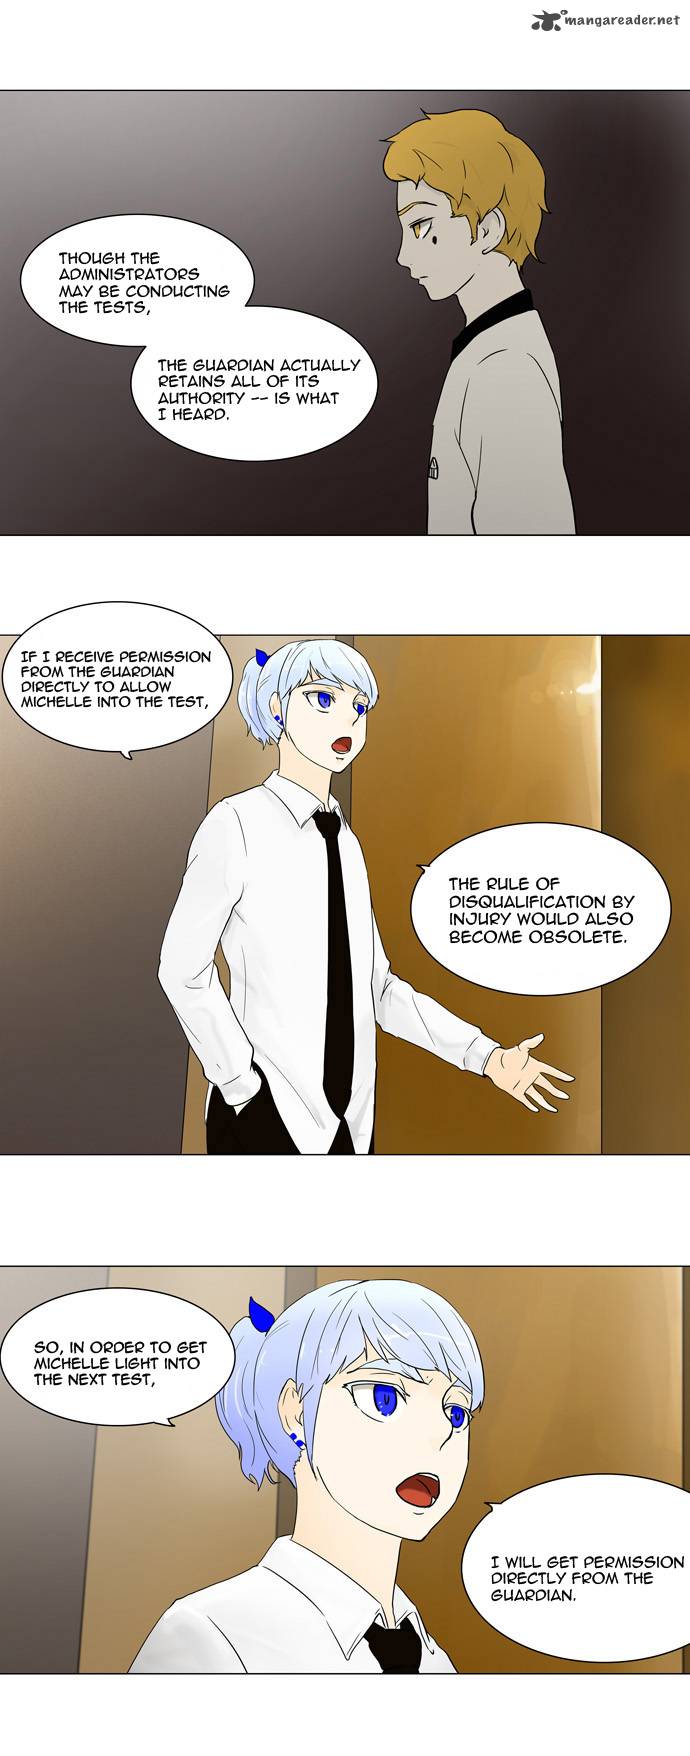 Tower Of God 58 11